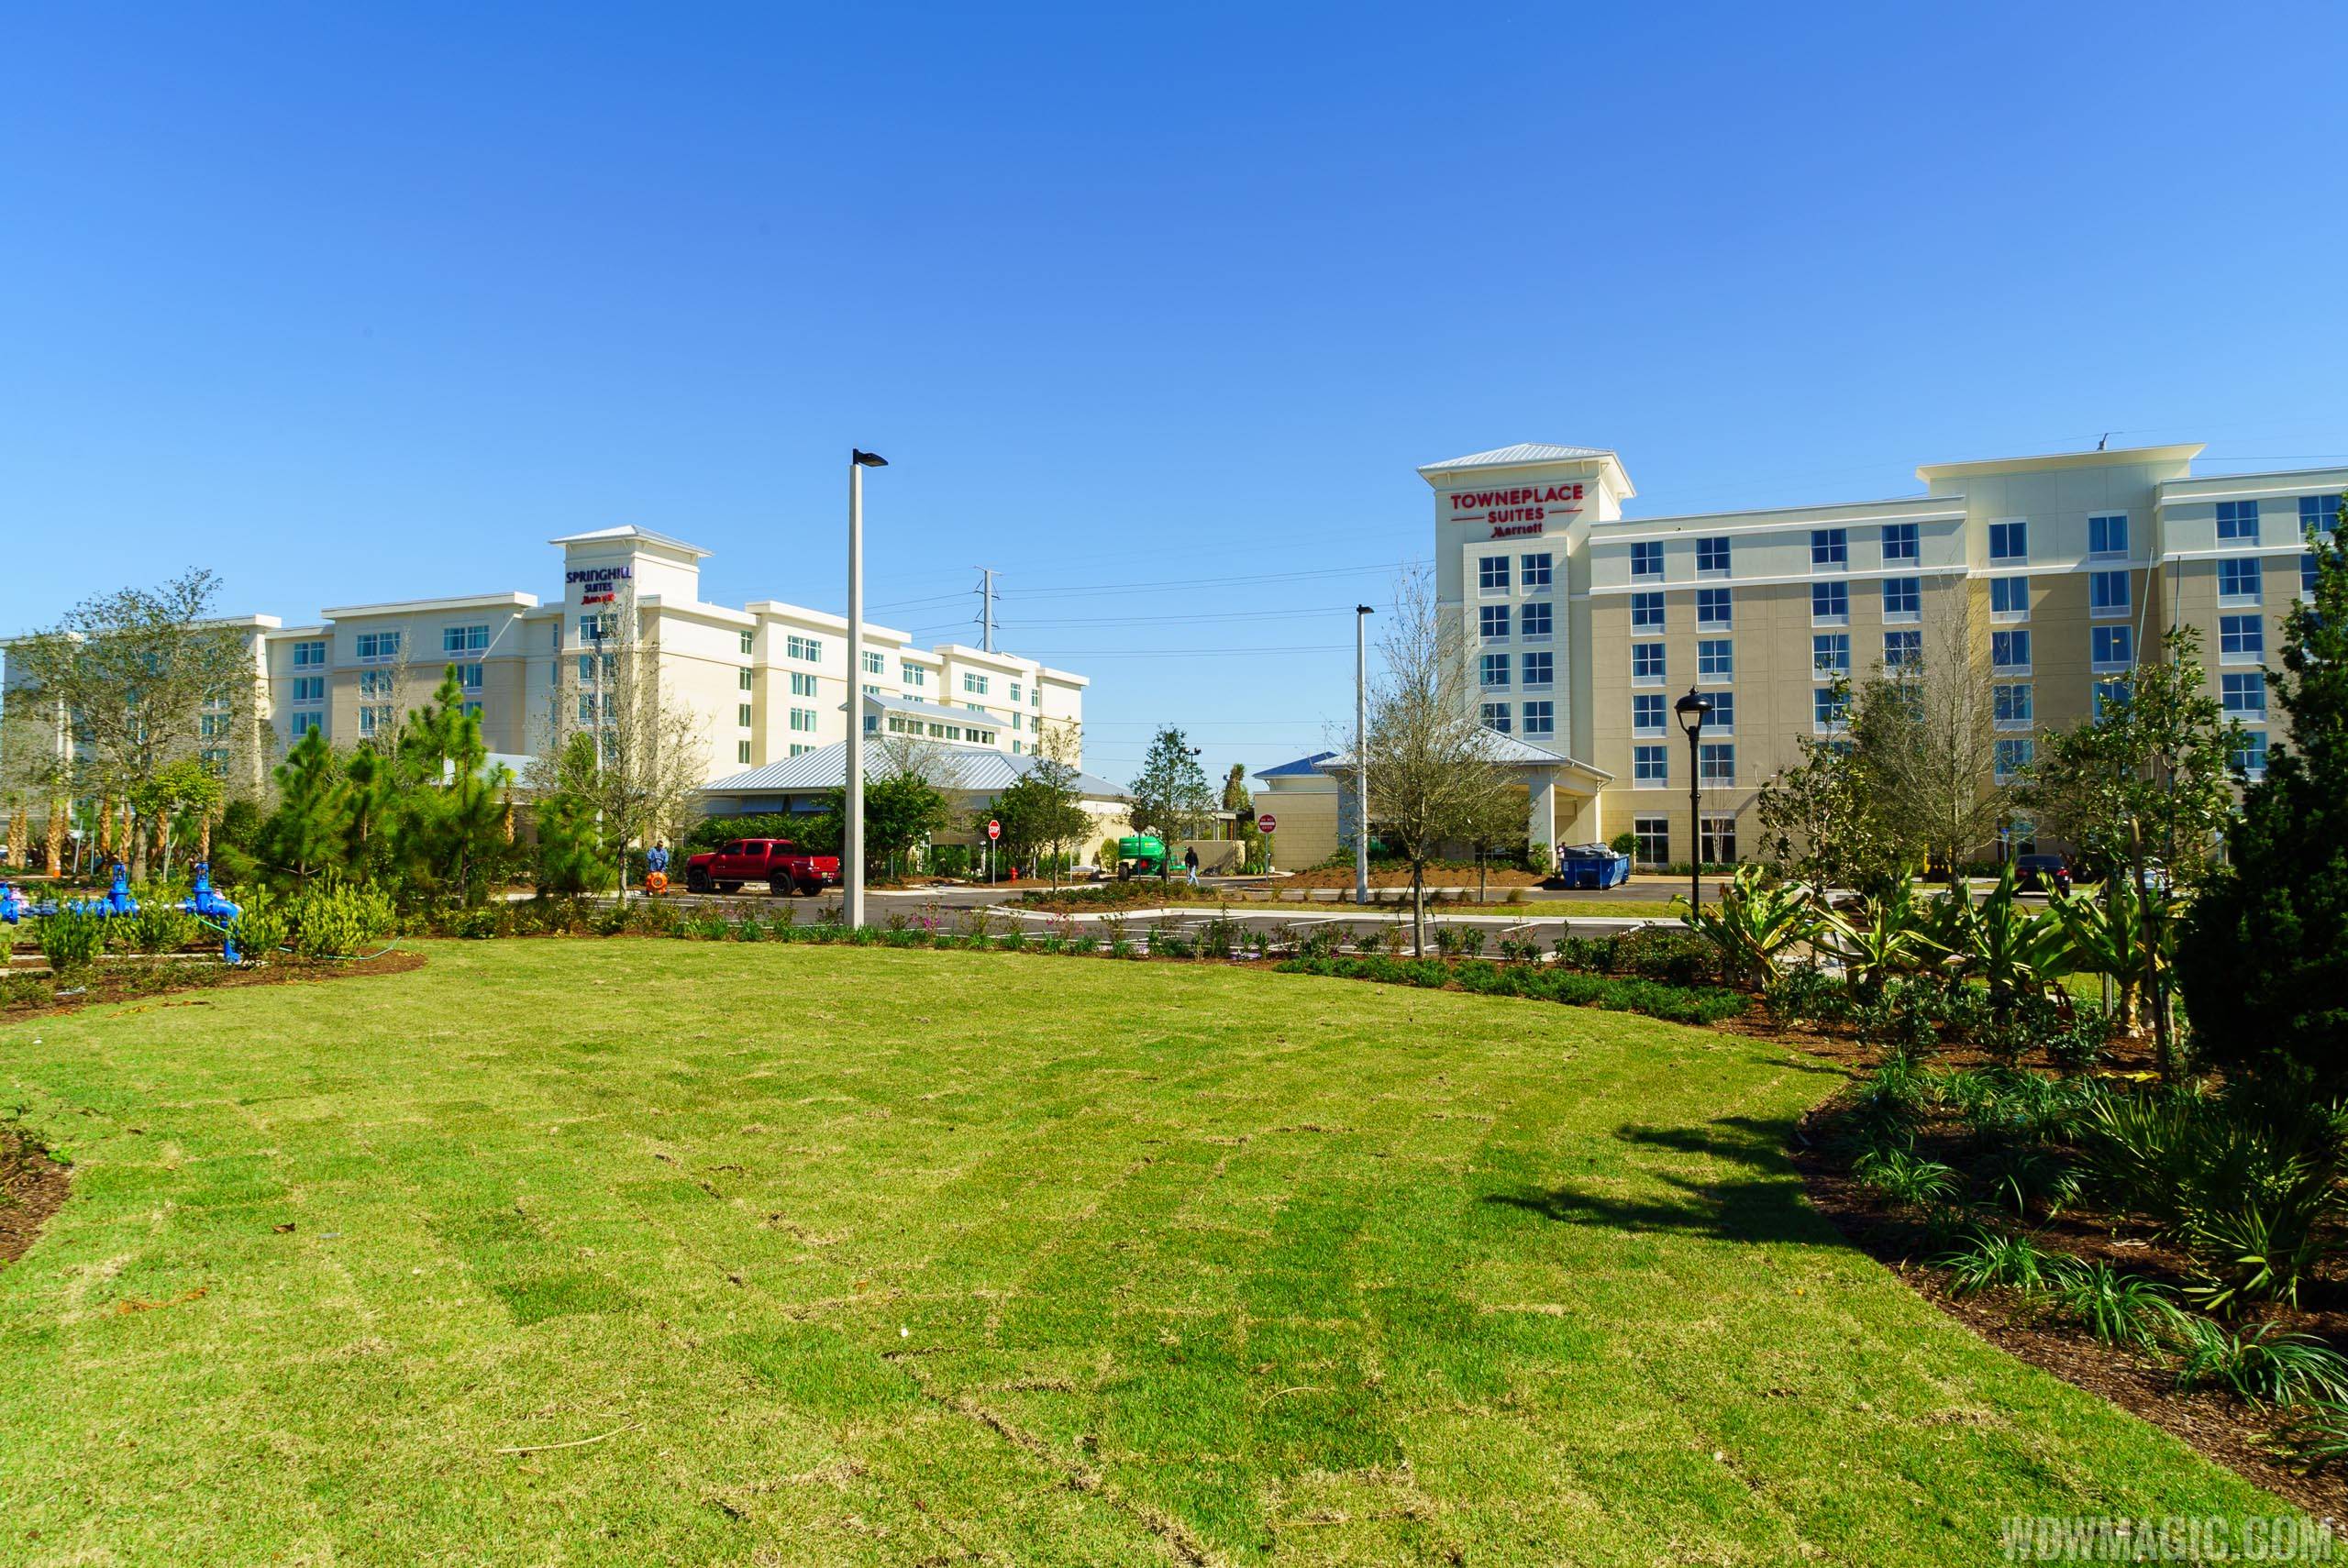 Flamingo Crossing hotels SpringHill Suites and TownePlace Suites will offer transport to the parks and a Disney Planning Center